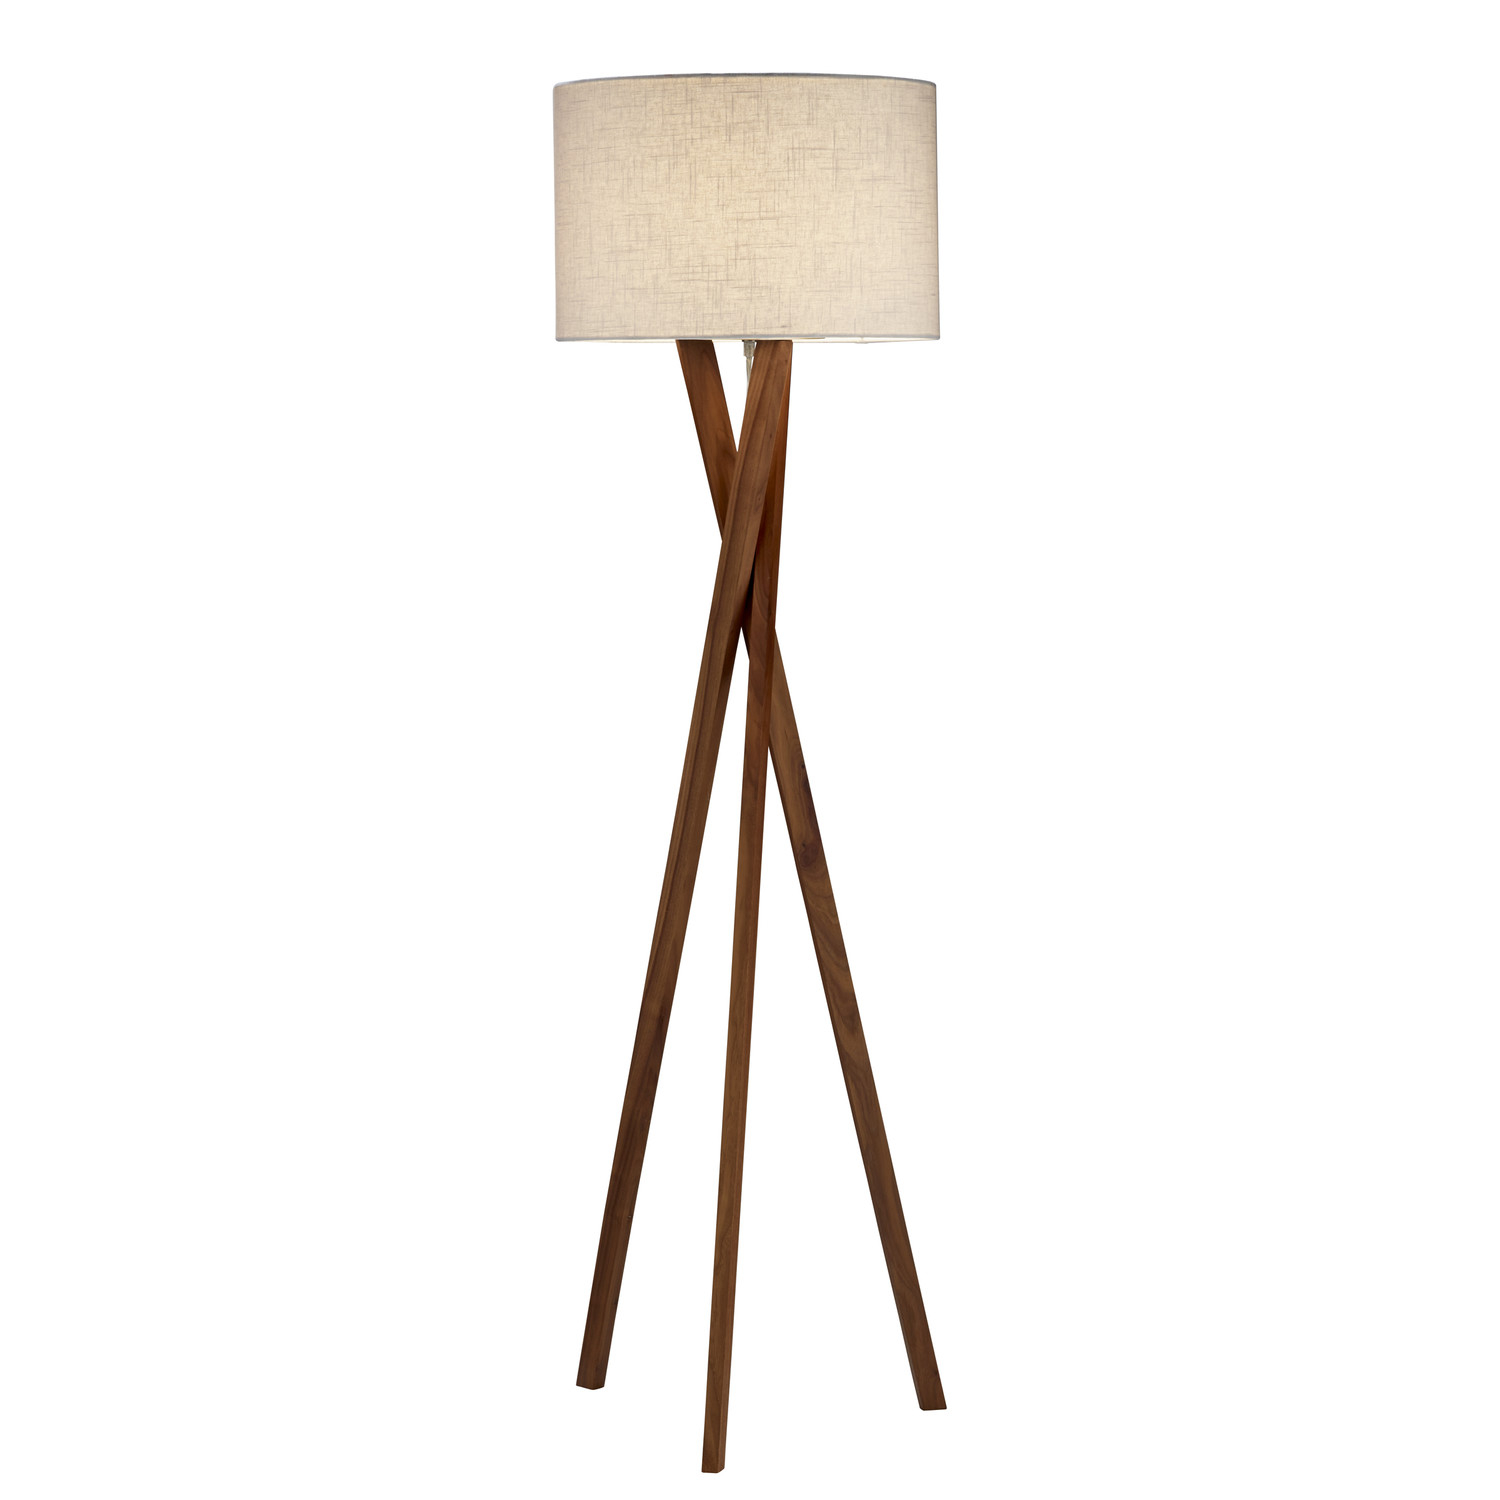 Modern Romantic Floor Lamp Wooden Trend Including Image Q Au with size 1500 X 1500